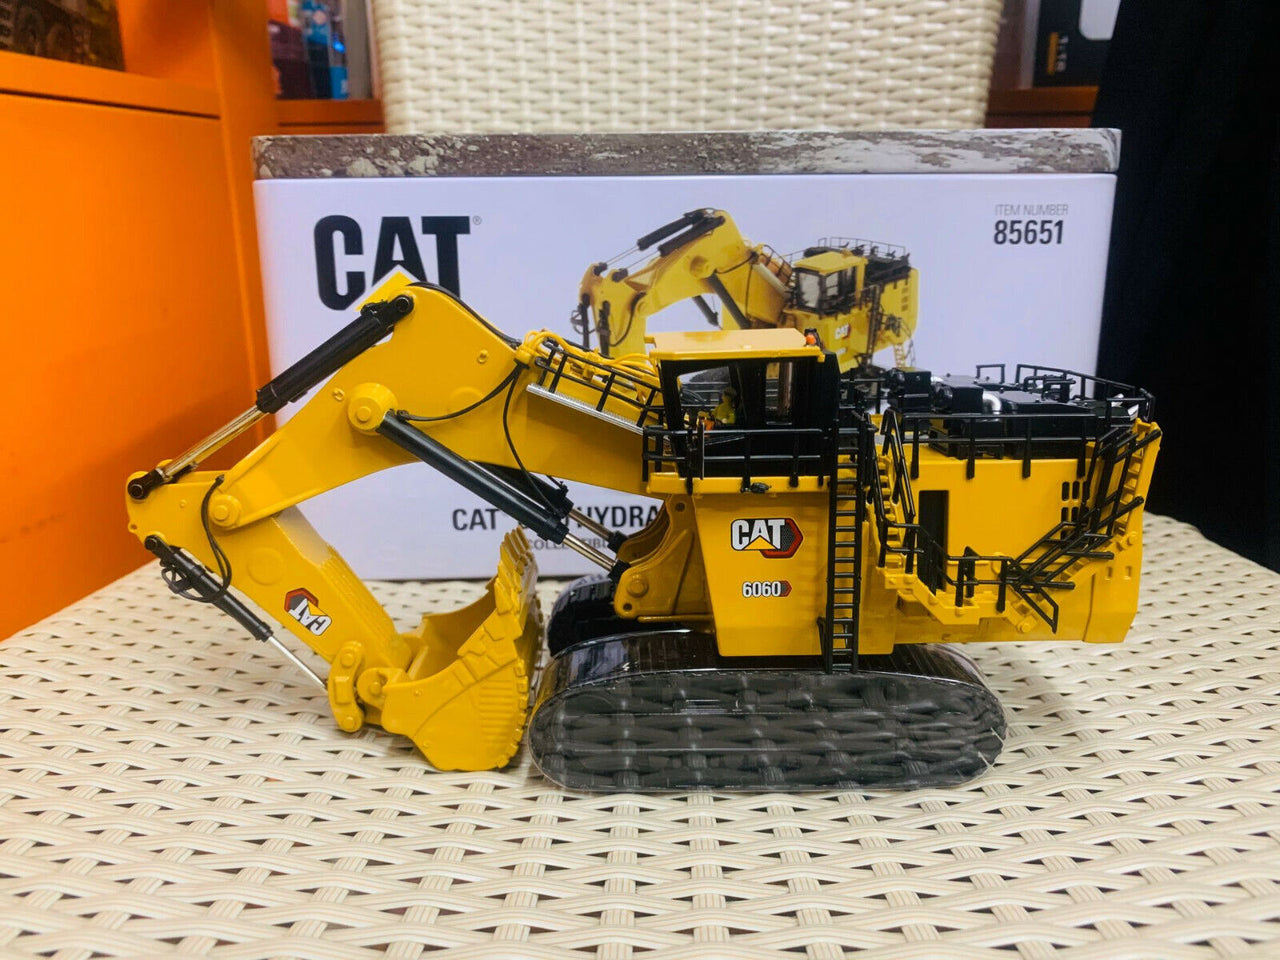 85651 Caterpillar 6060 Hydraulic Front Loader Scale 1:87